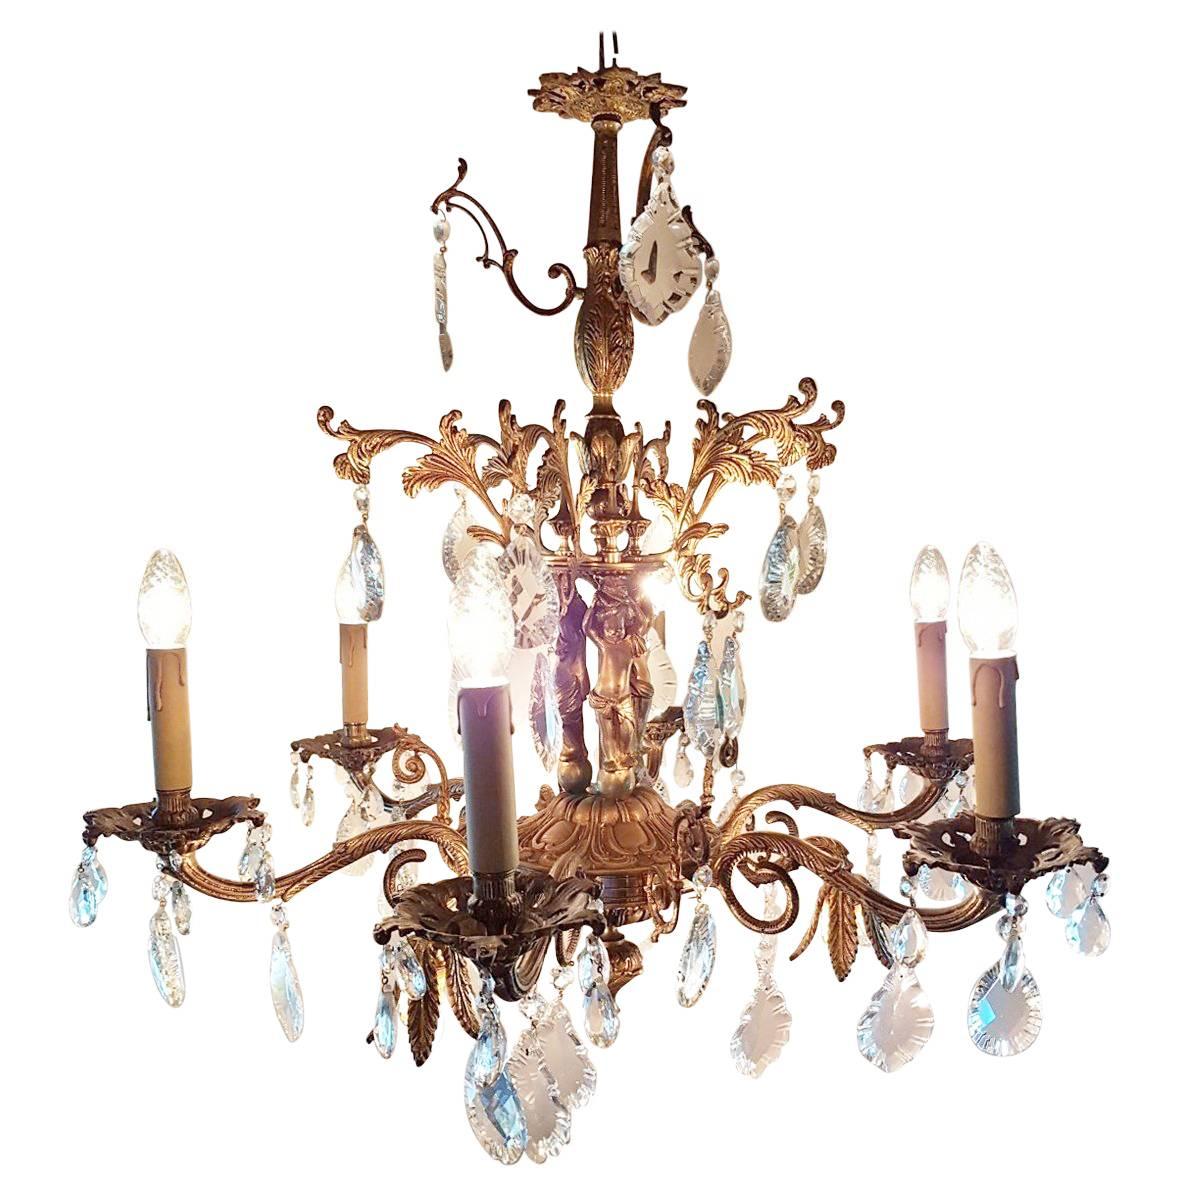 Spanish Chandelier with Nine Lights, Three Small Kids on the Frame, Mid-1900 For Sale